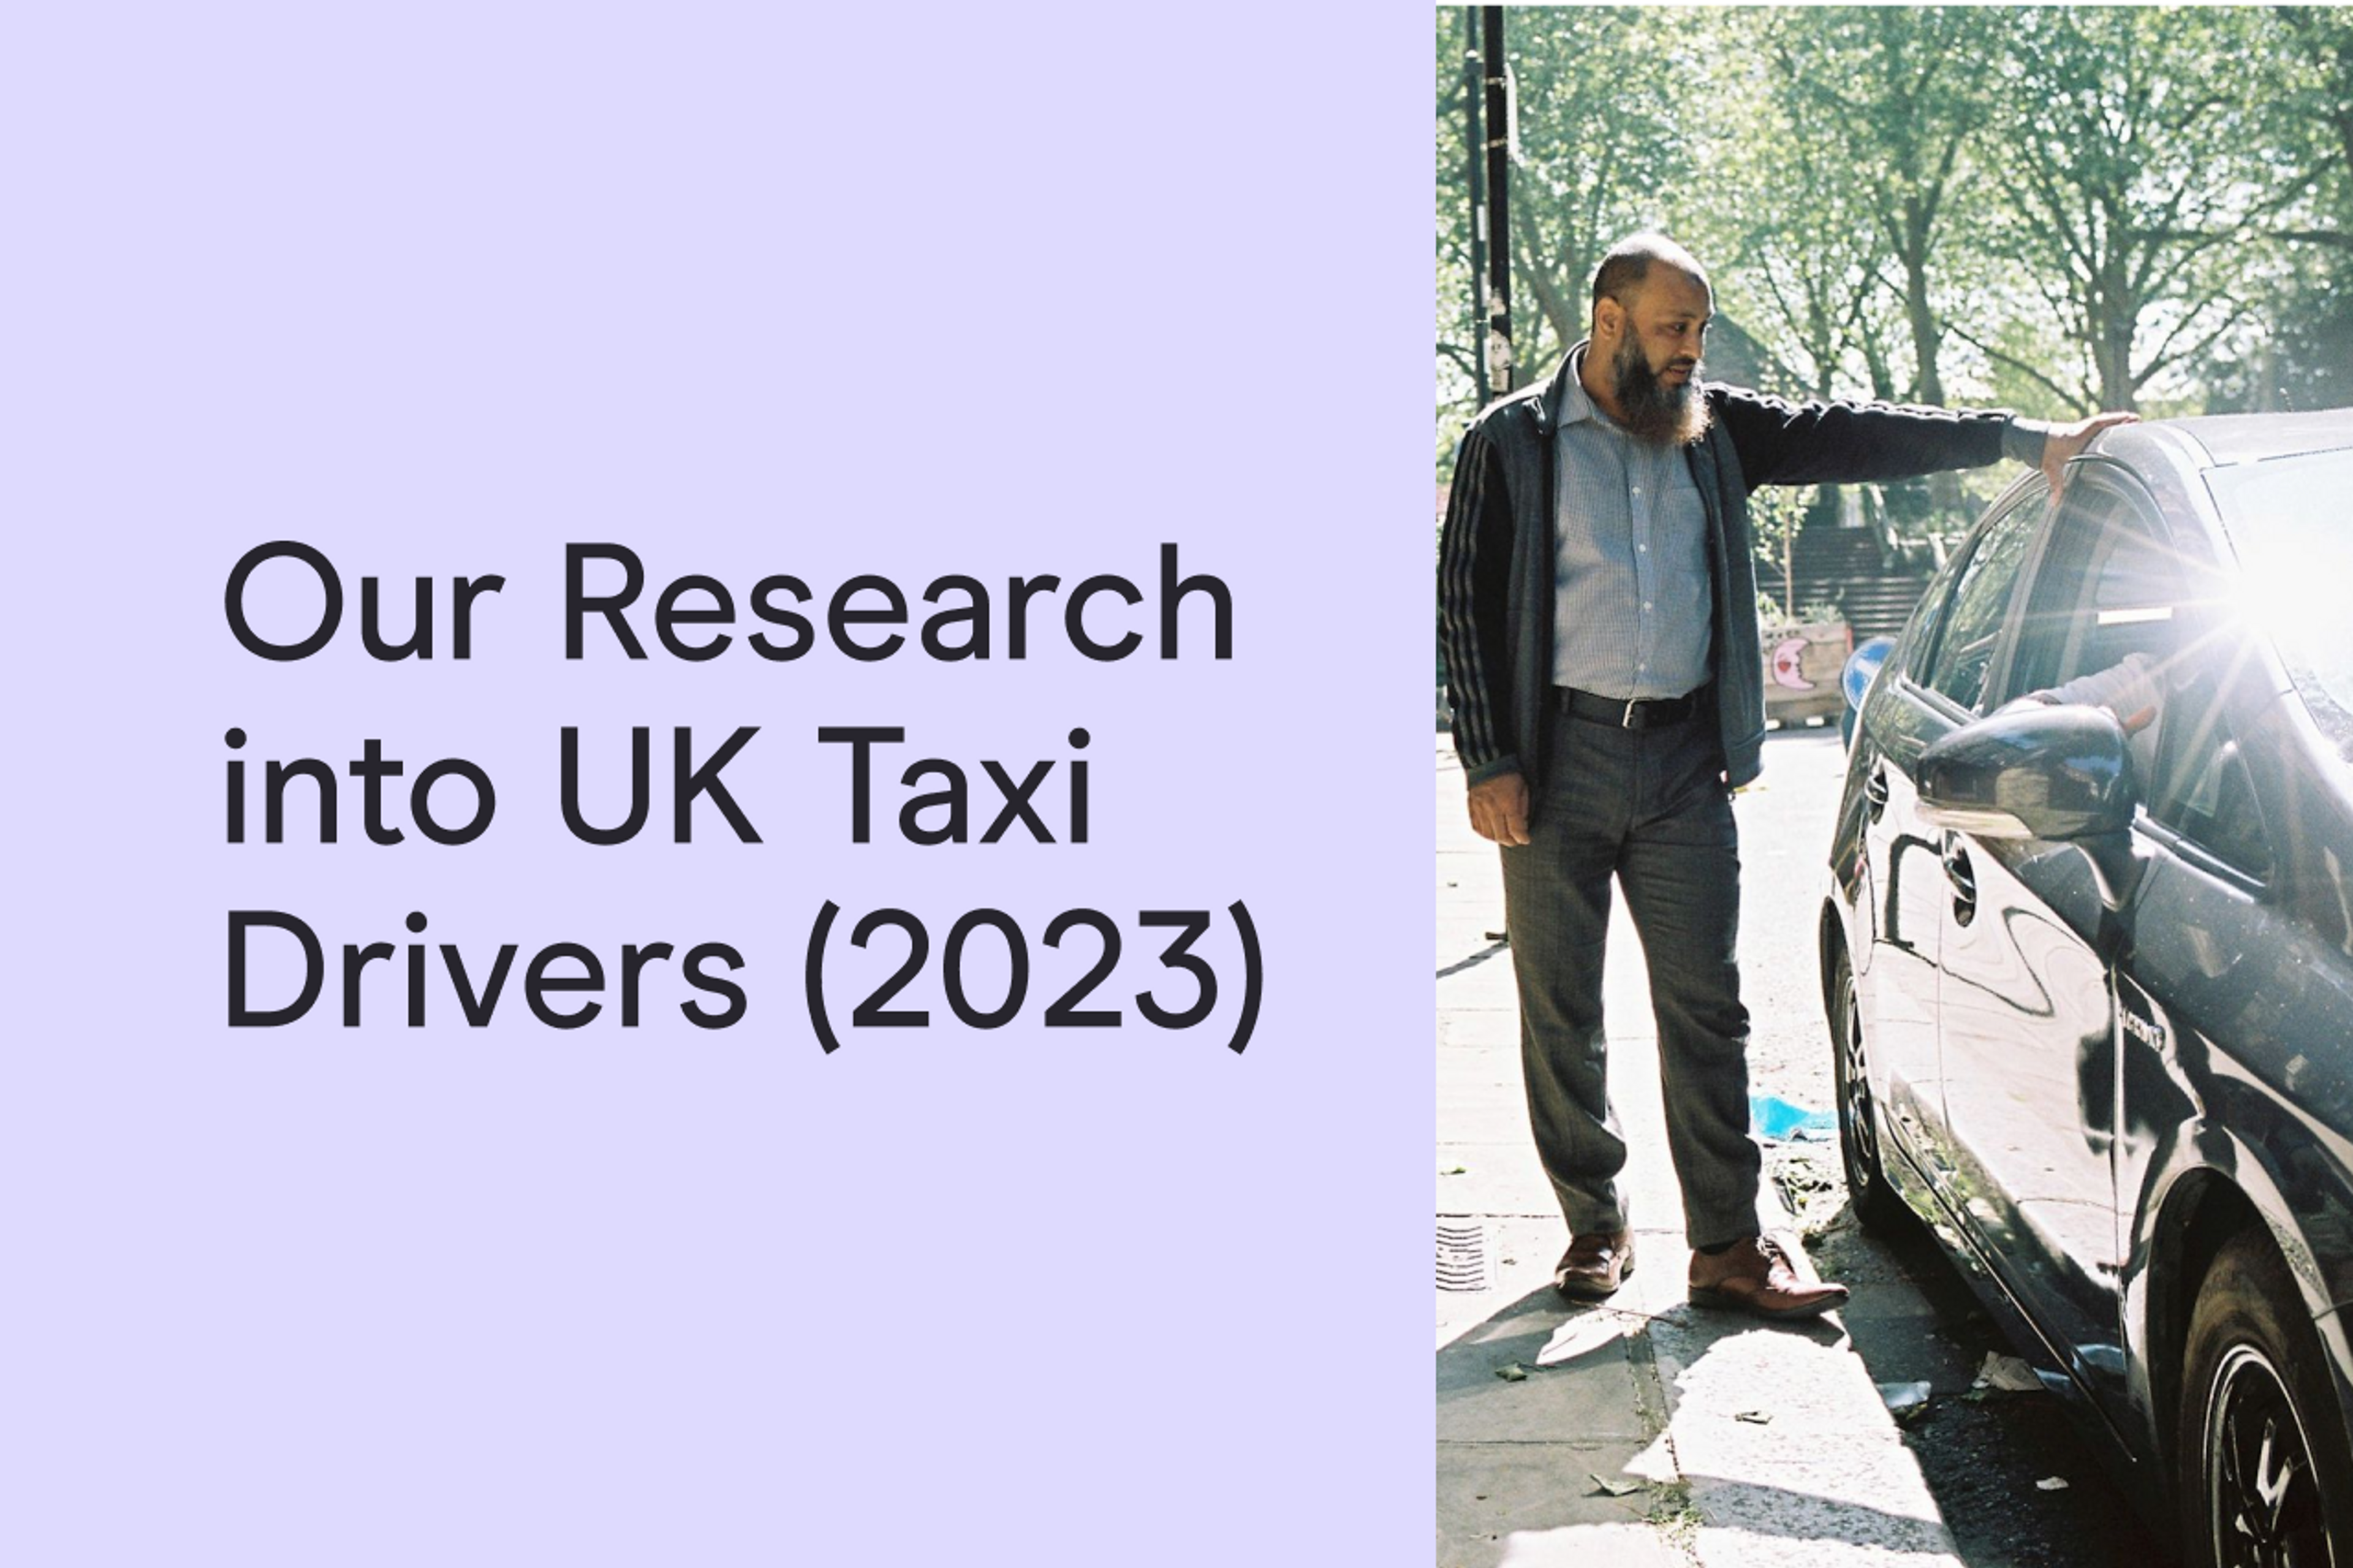 Our Research into UK Taxi Drivers (2023)